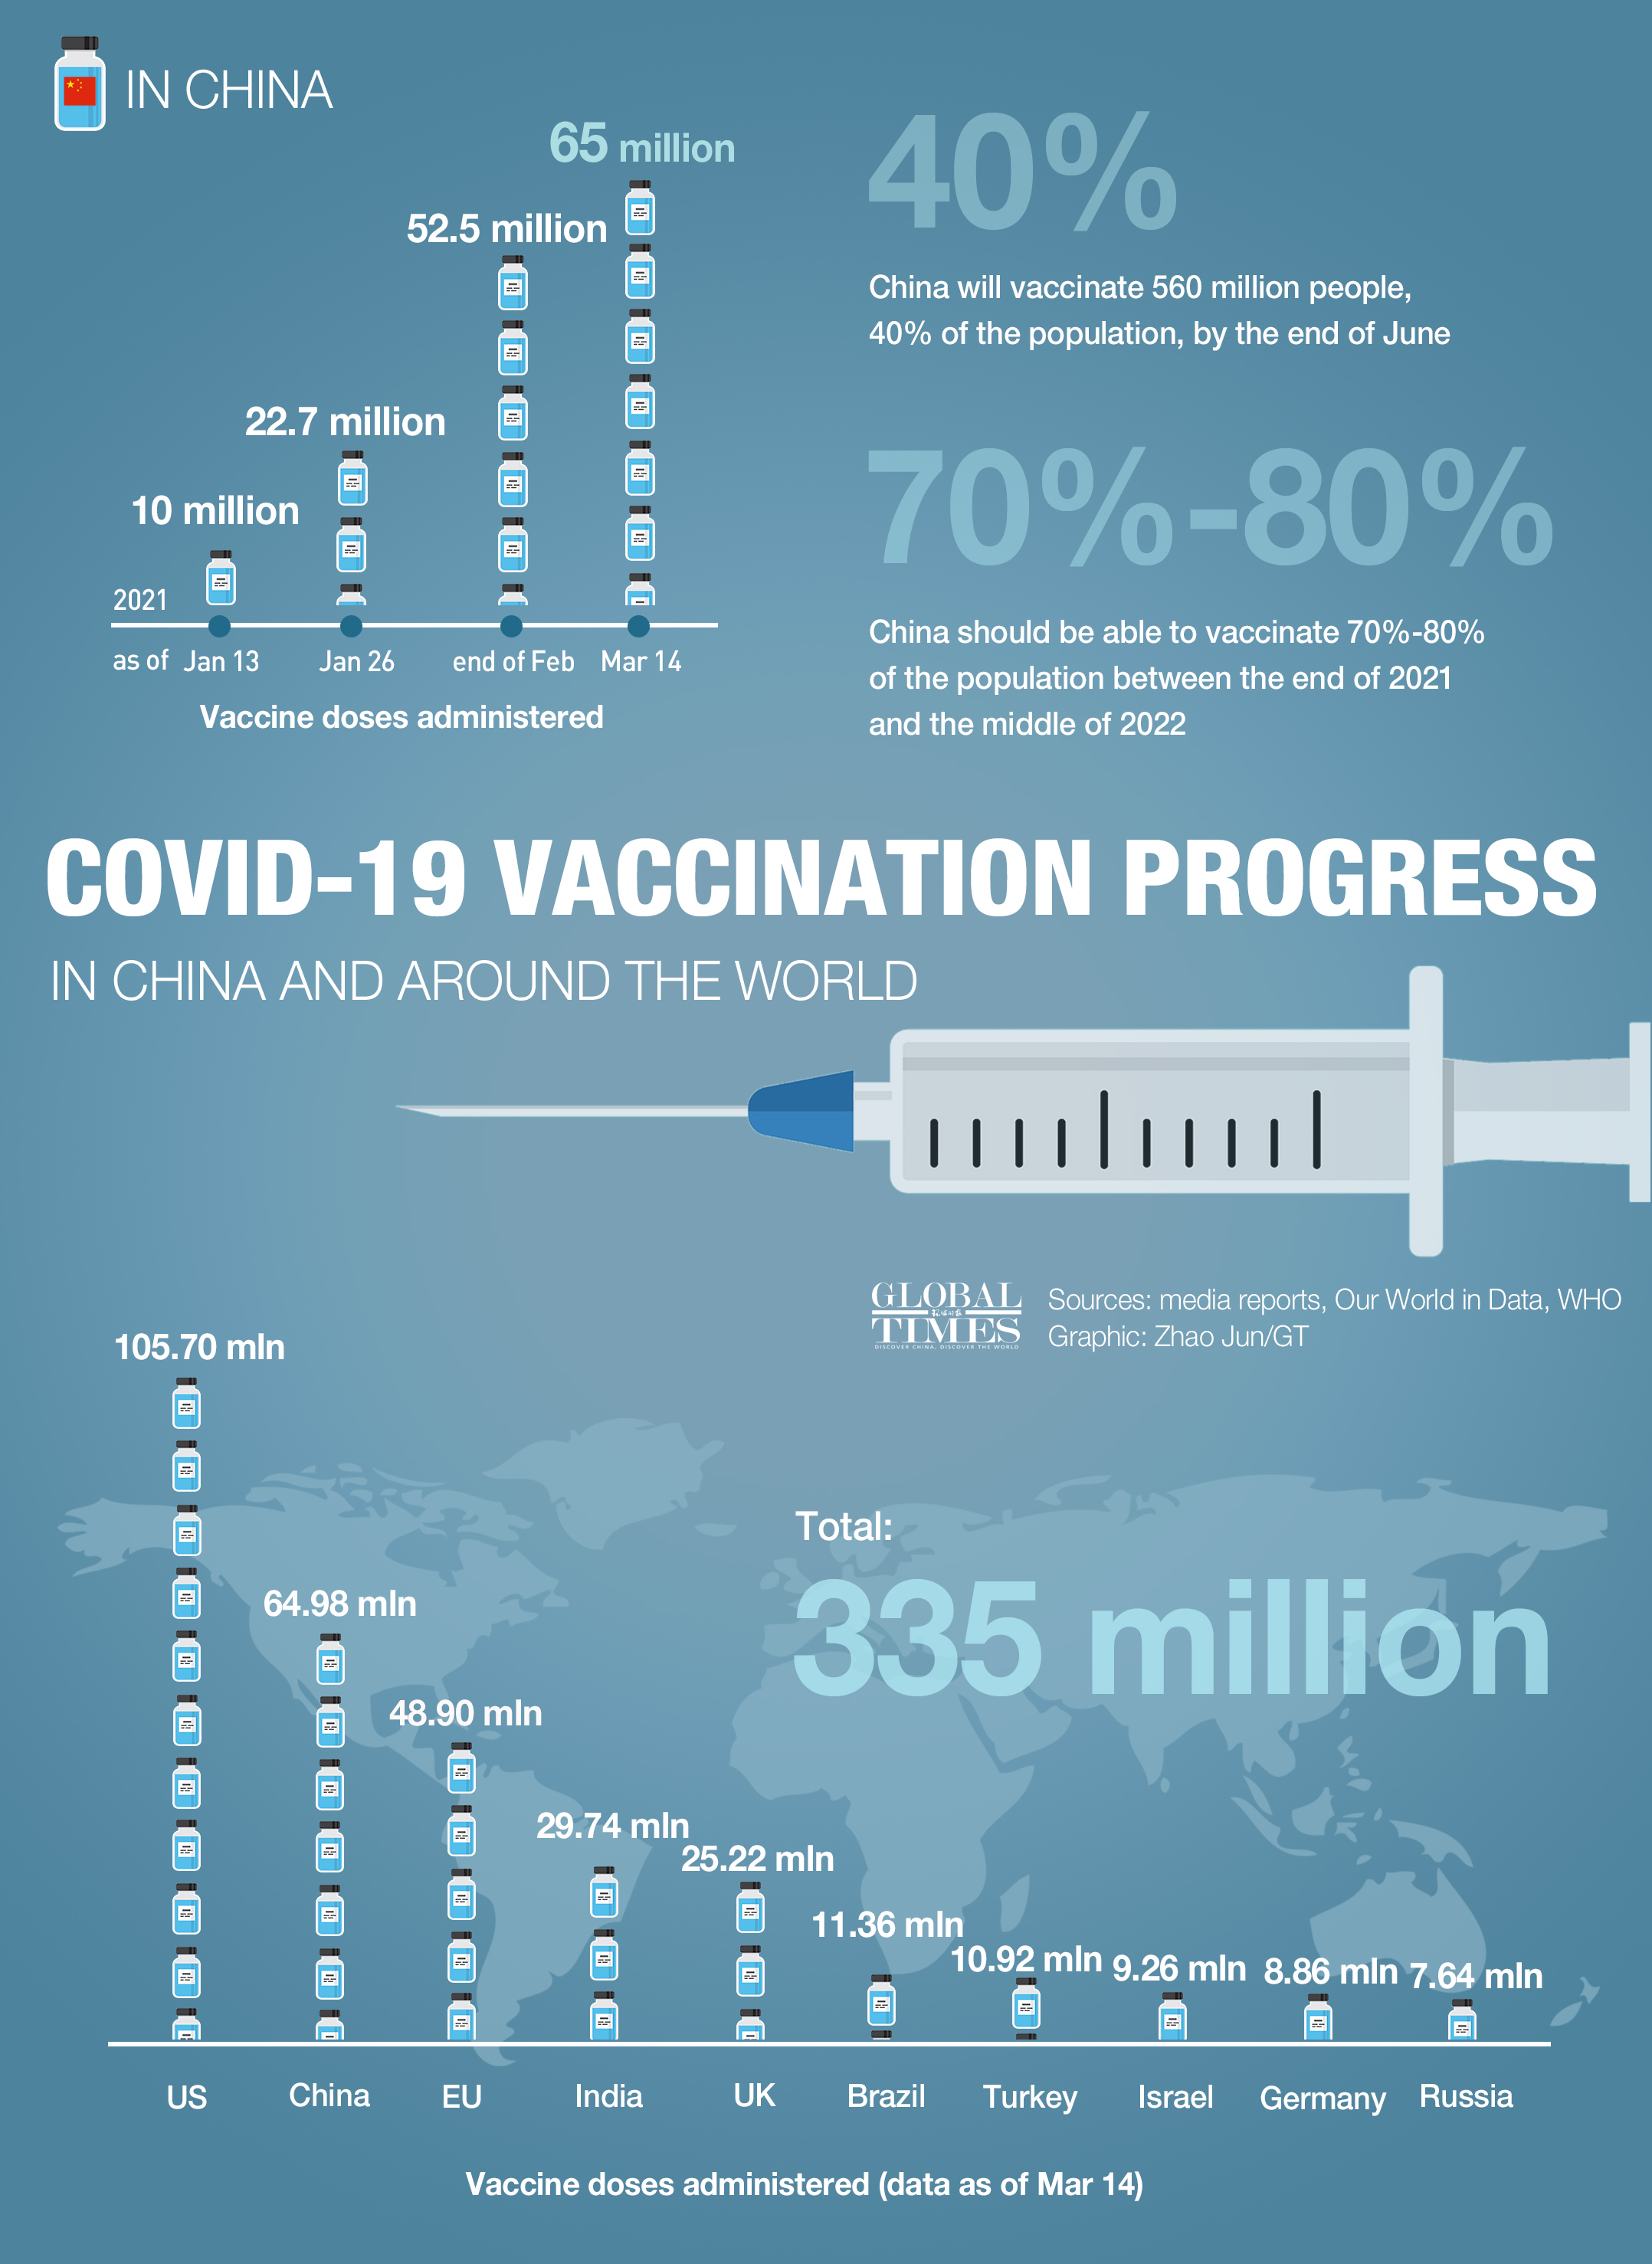 COVID-19 vaccination progress in China and around the world. Infographic: GT